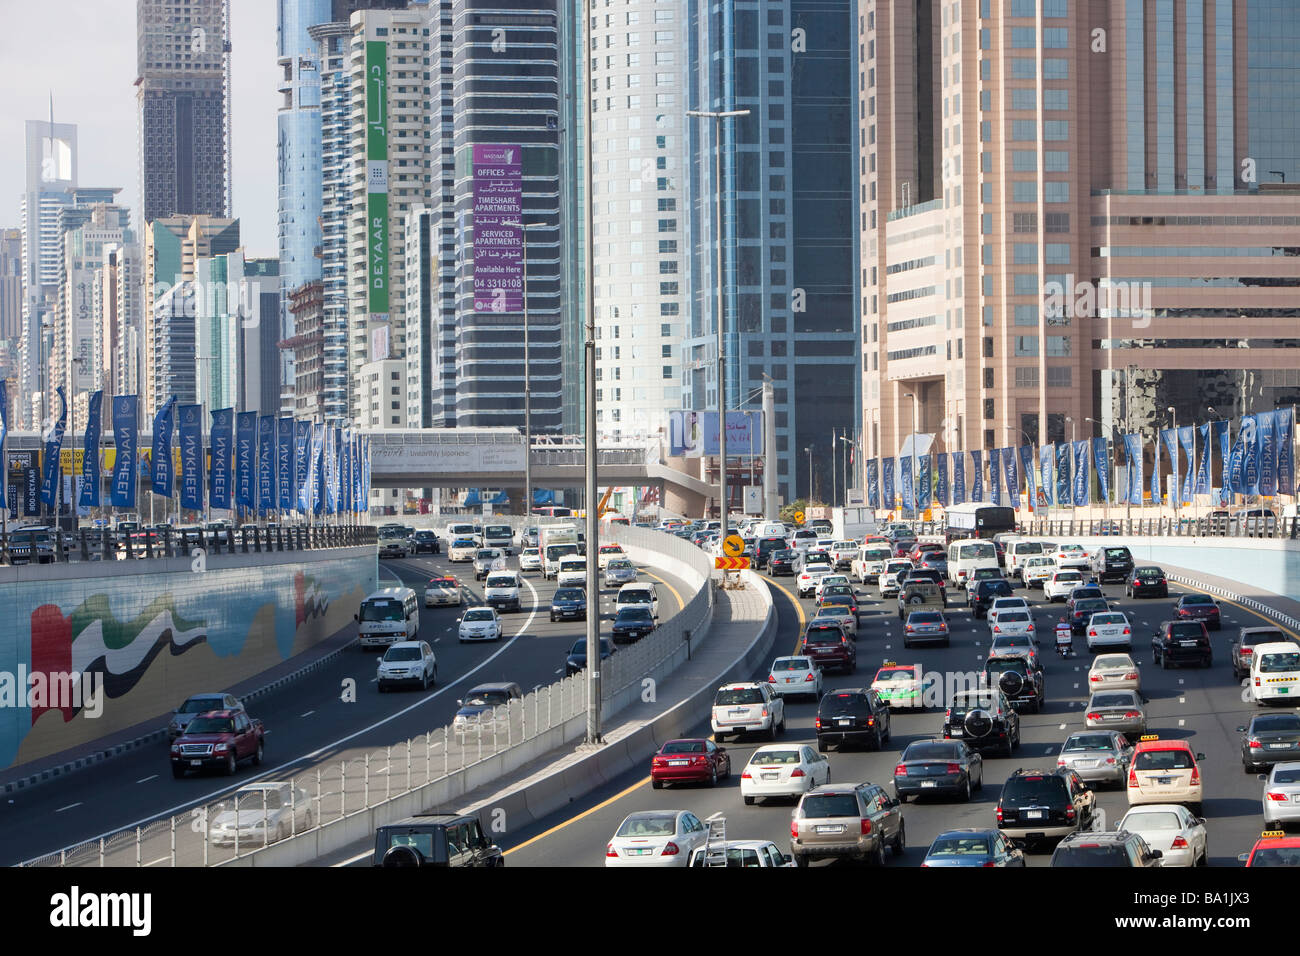 Cars in Dubai city in the Middle East Stock Photo